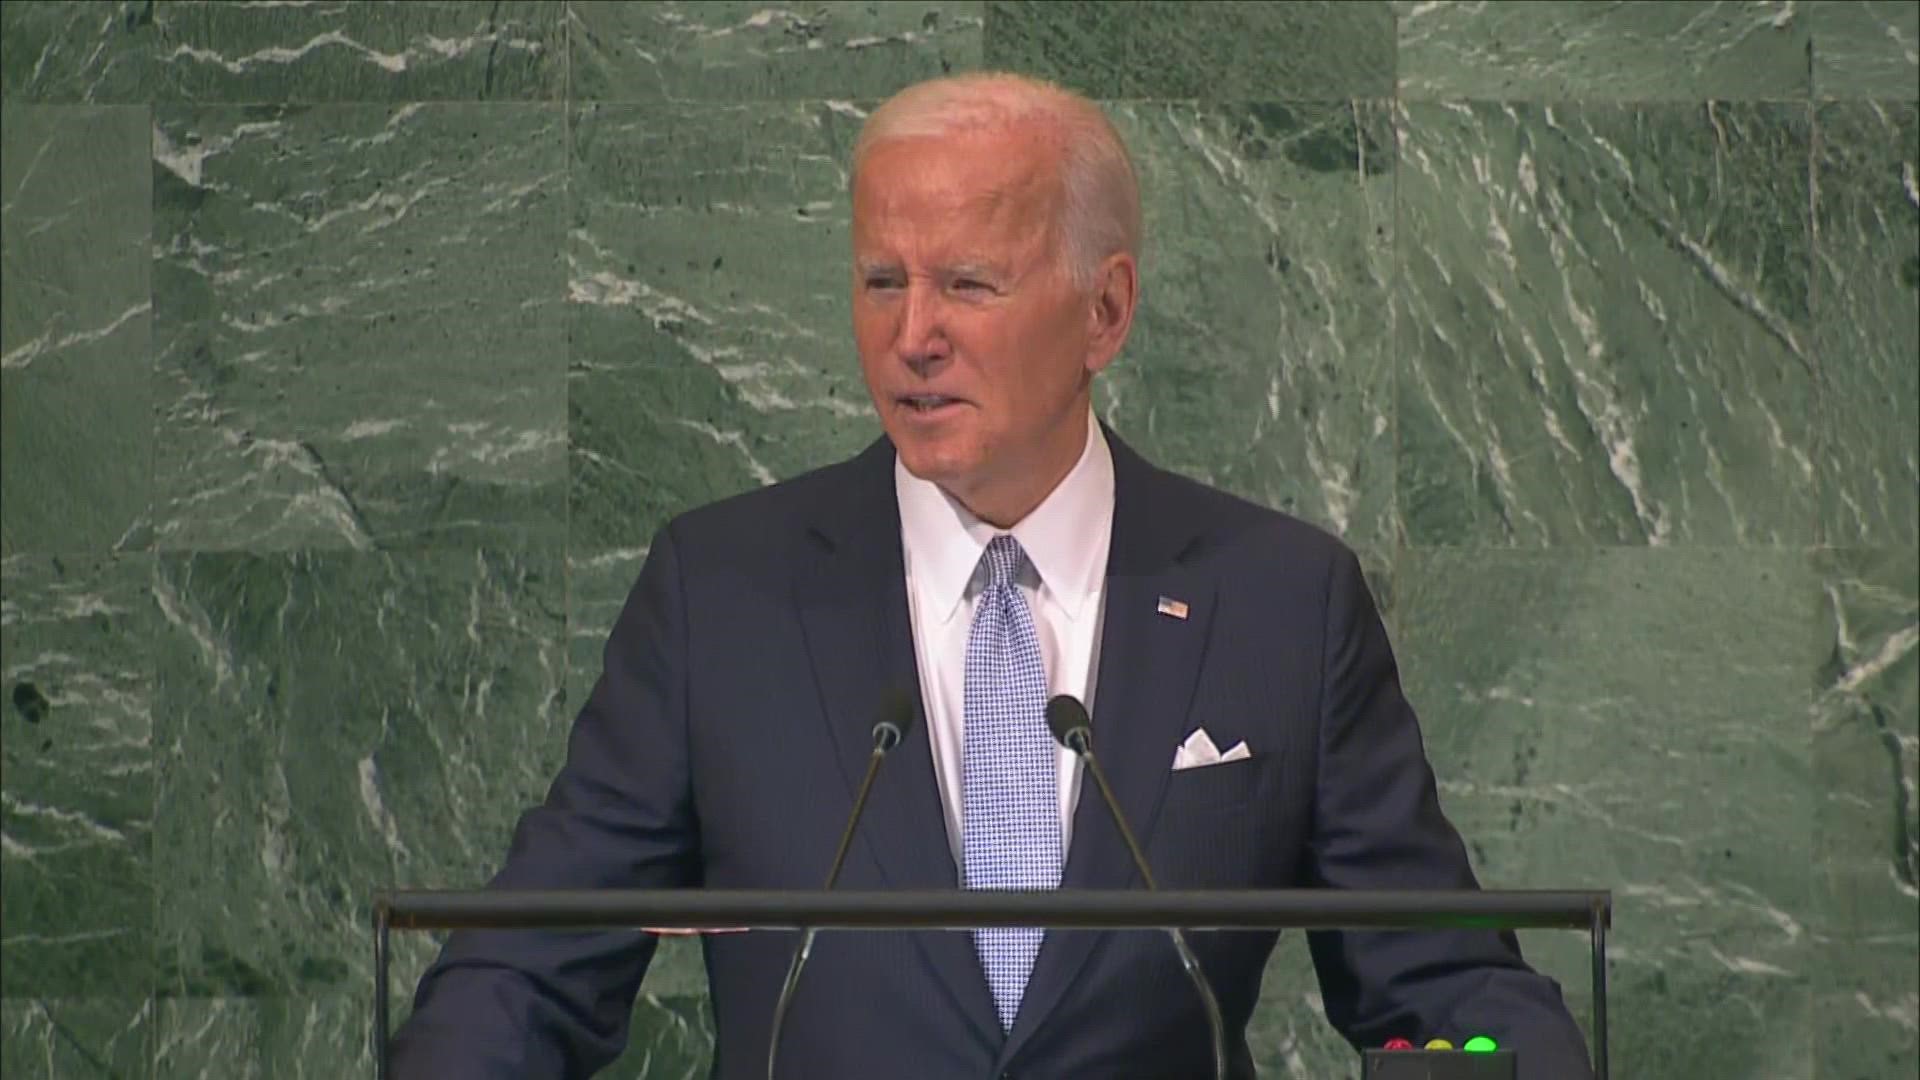 Speaking to the U.N. General Assembly, President Joe Biden called on world leaders to stand in solidarity with Ukraine.